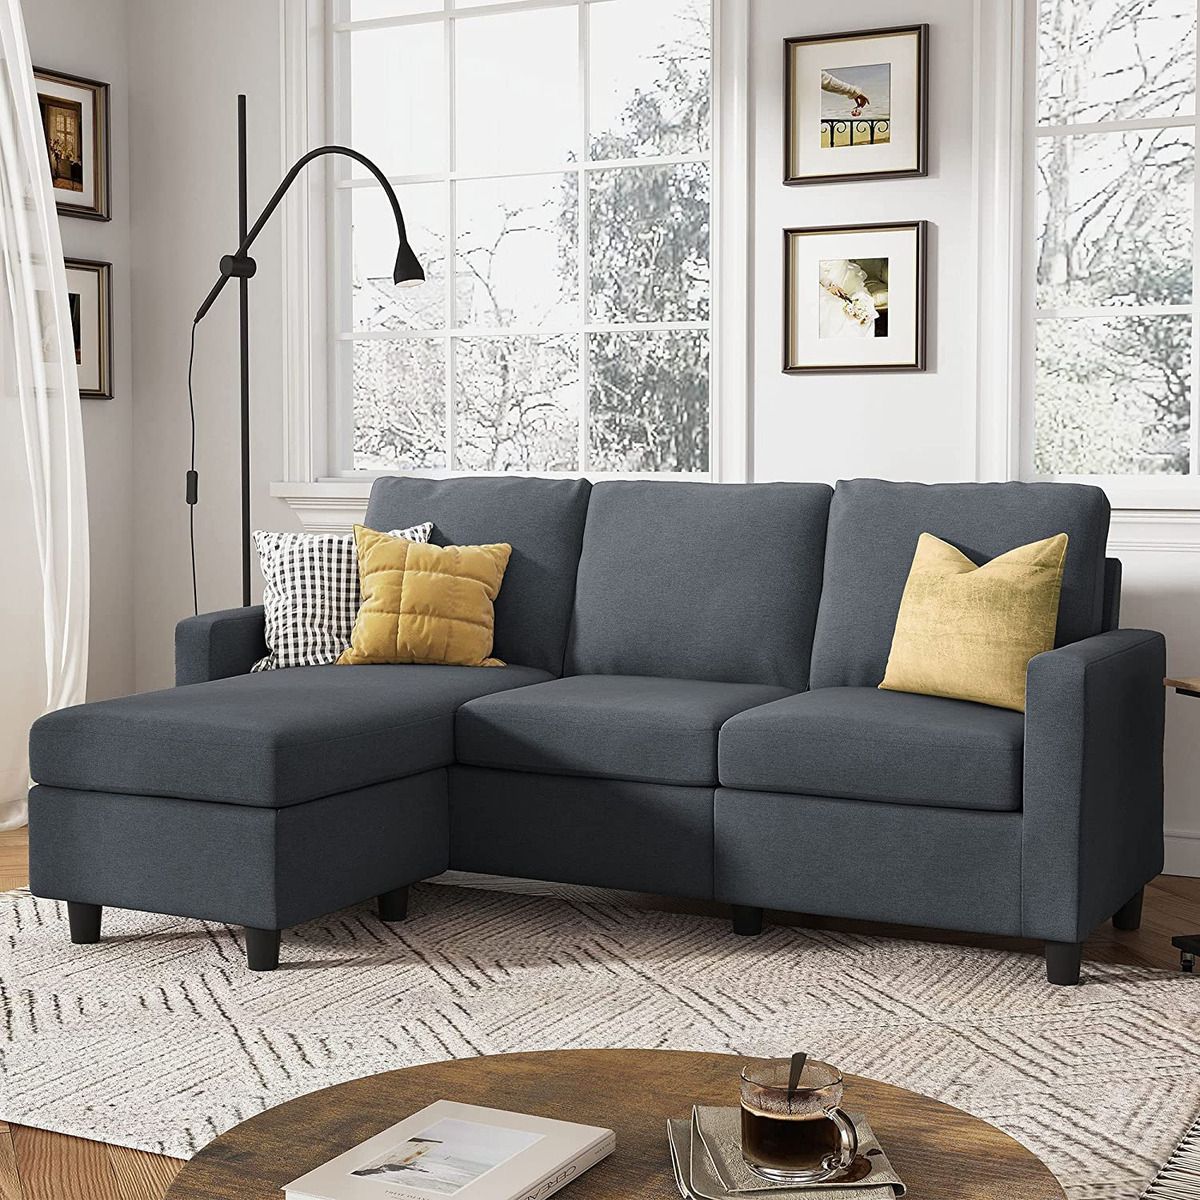 Honbay Convertible Sectional Sofa, L Shaped Couch With Reversible Chaise  For Sma | Ebay Regarding Convertible L Shaped Sectional Sofas (View 8 of 15)